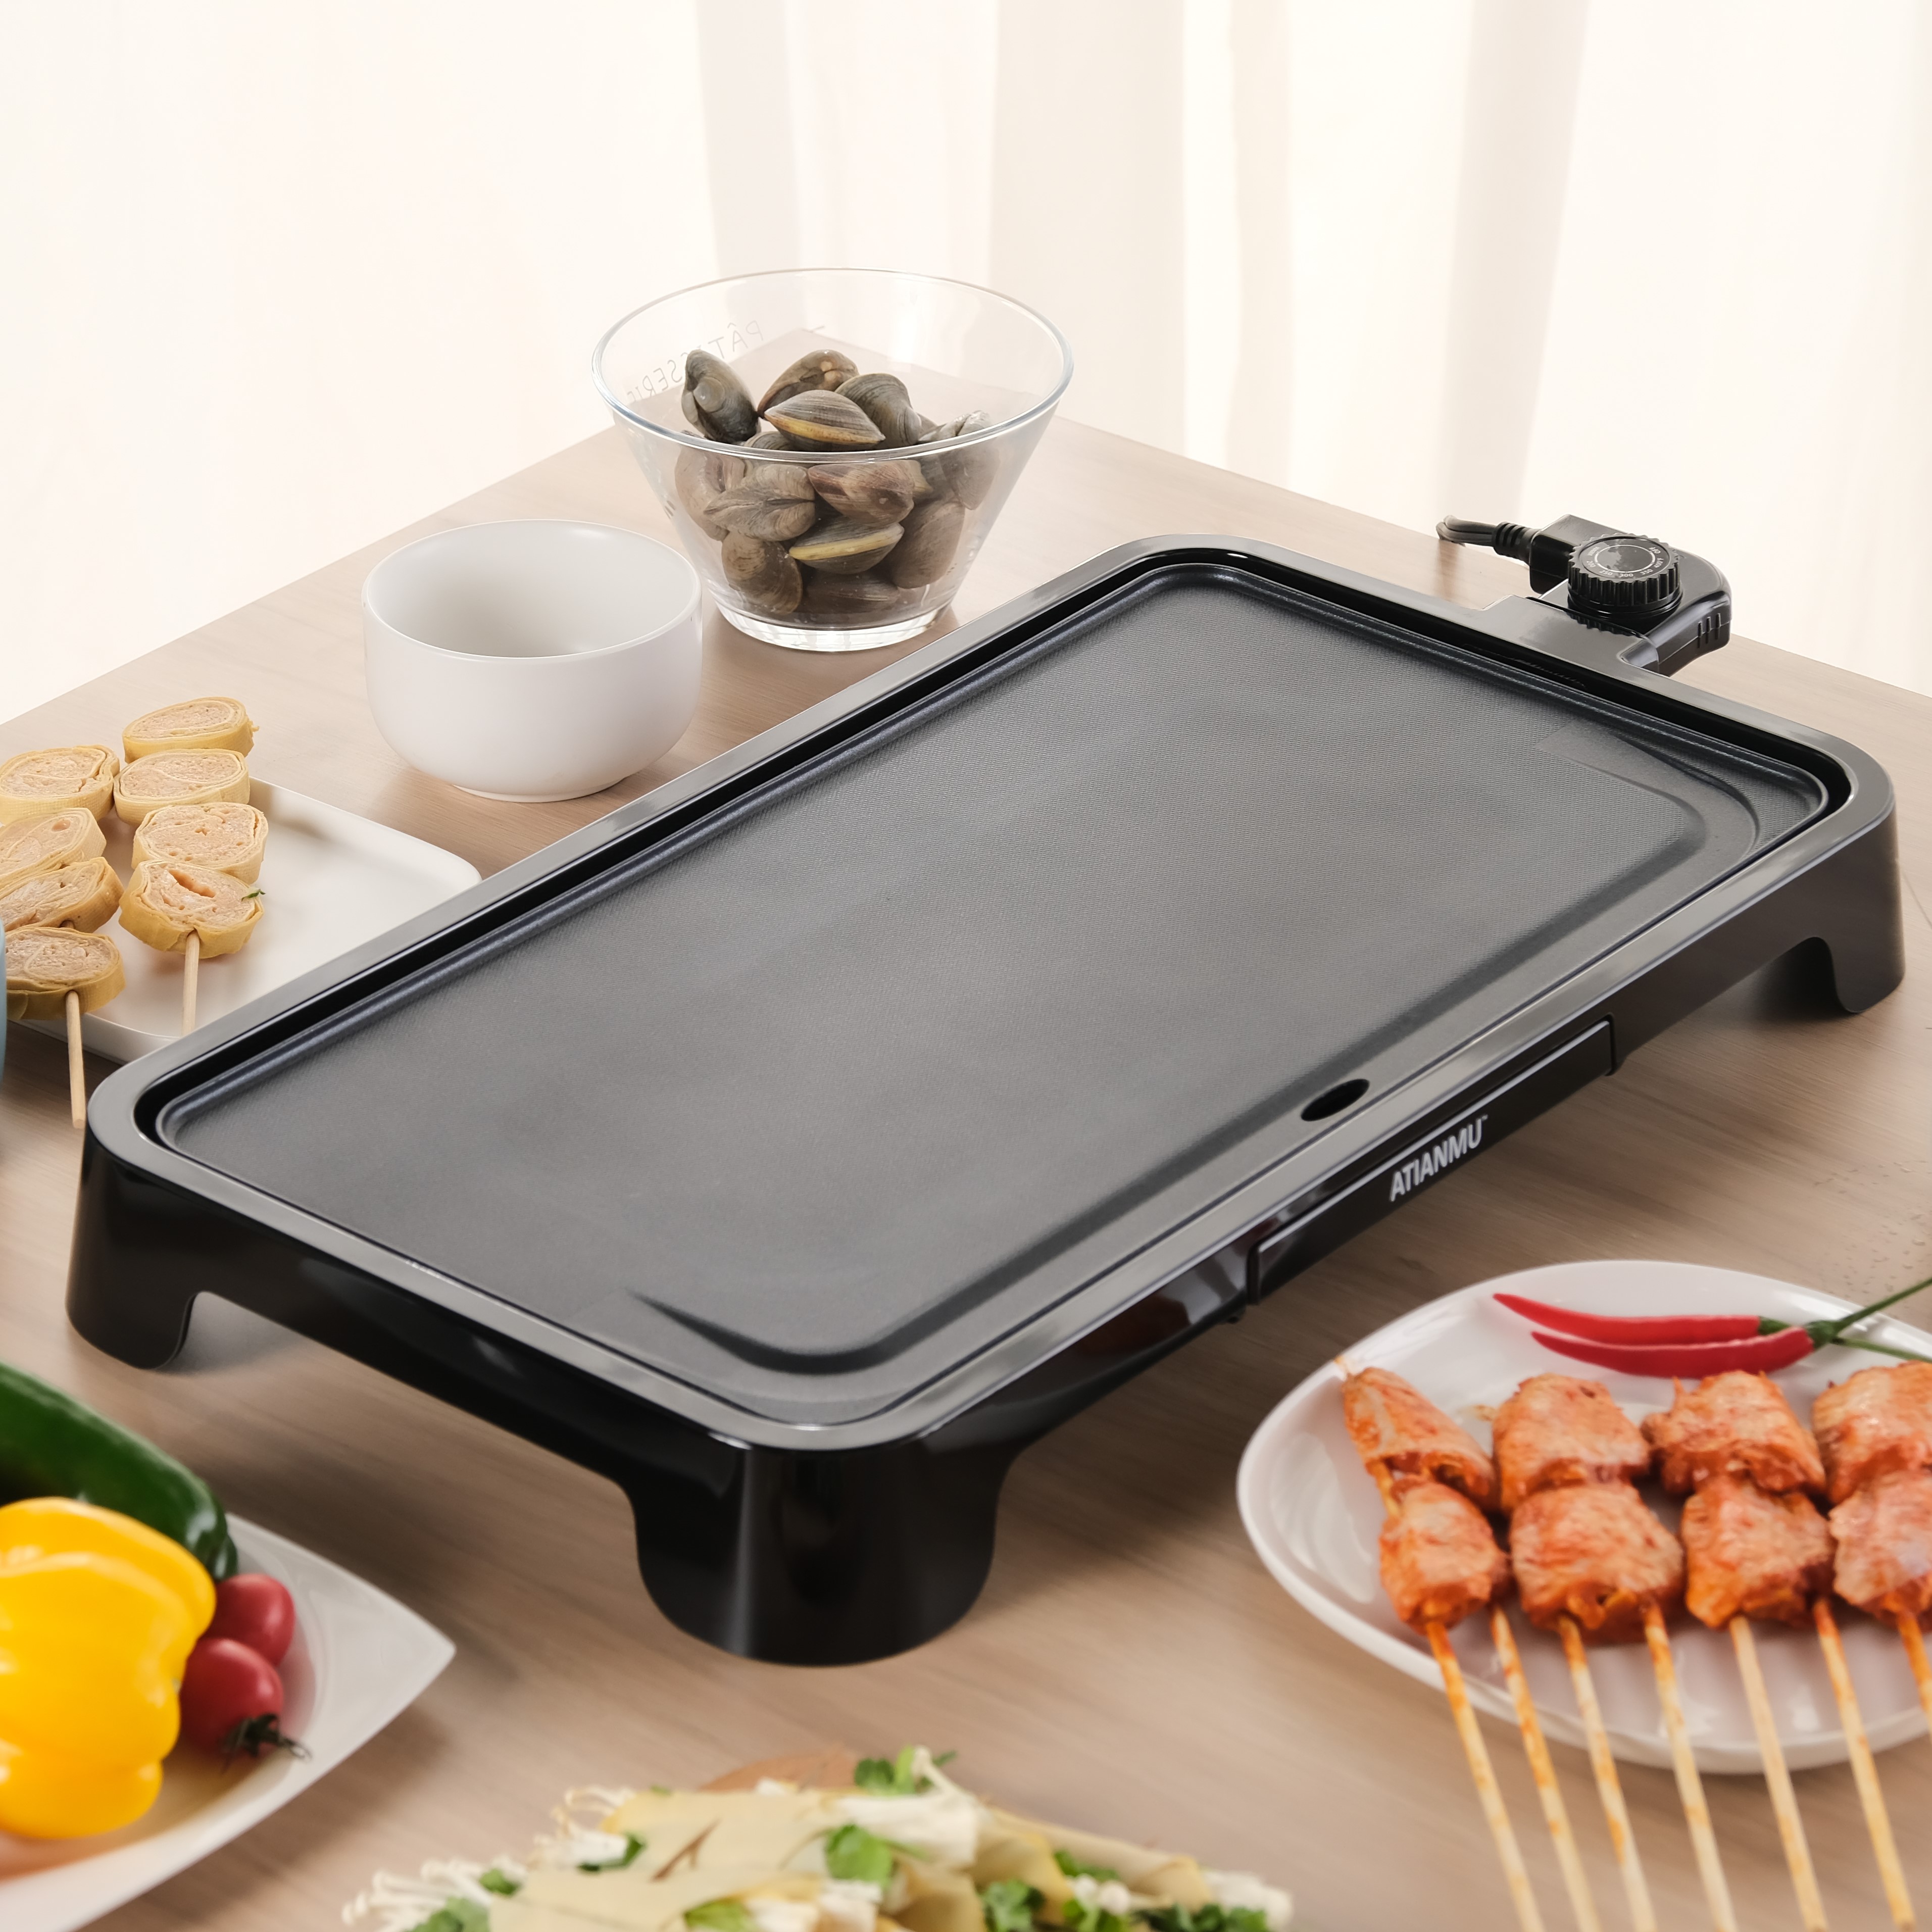 Fixed Plate Electronic Griddle Cool Touch Electronic Griddle 10 x20 Large Cooking Area Electric Griddle Nonstick Easy Cleaning For Eggs Pancakes Burgers 1500W details 1